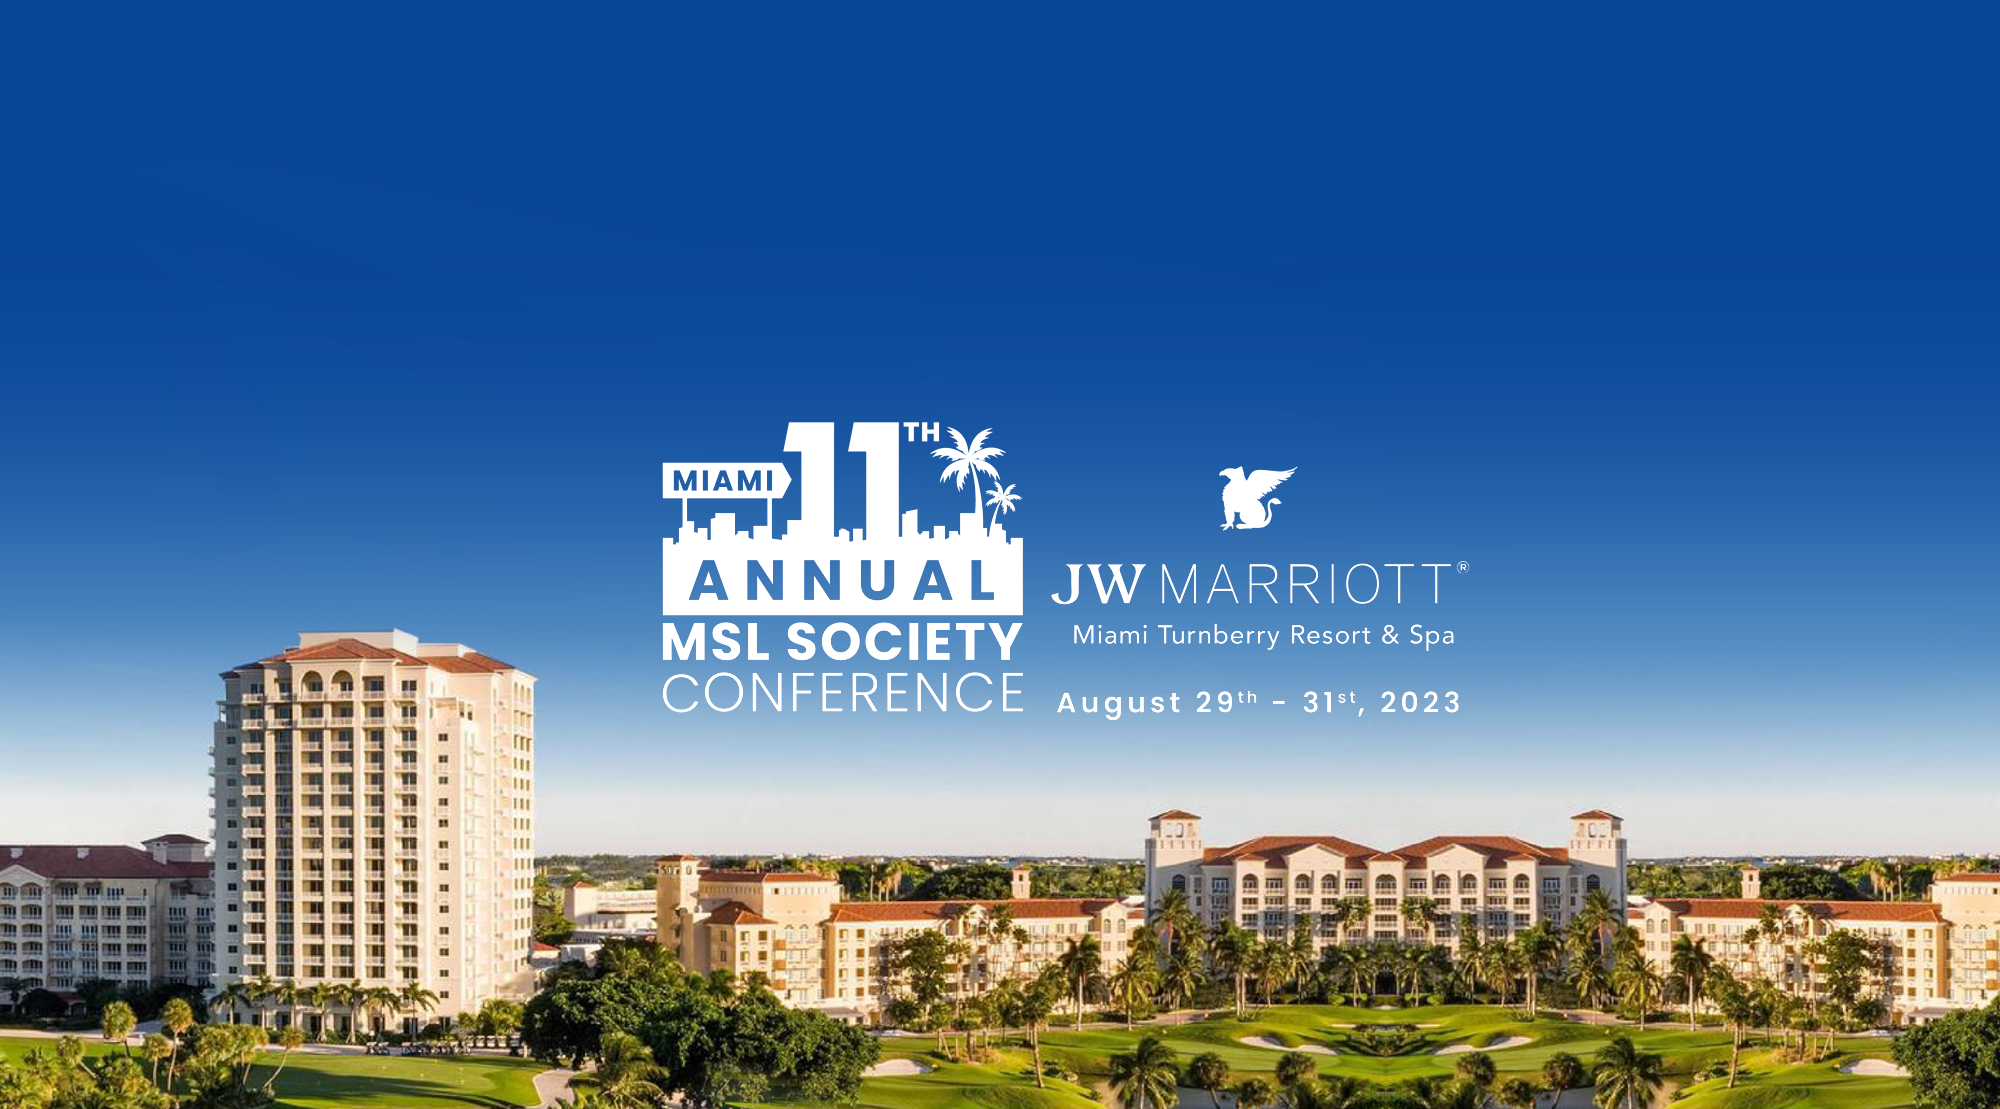 THE 11th MSL SOCIETY  ANNUAL CONFERENCE